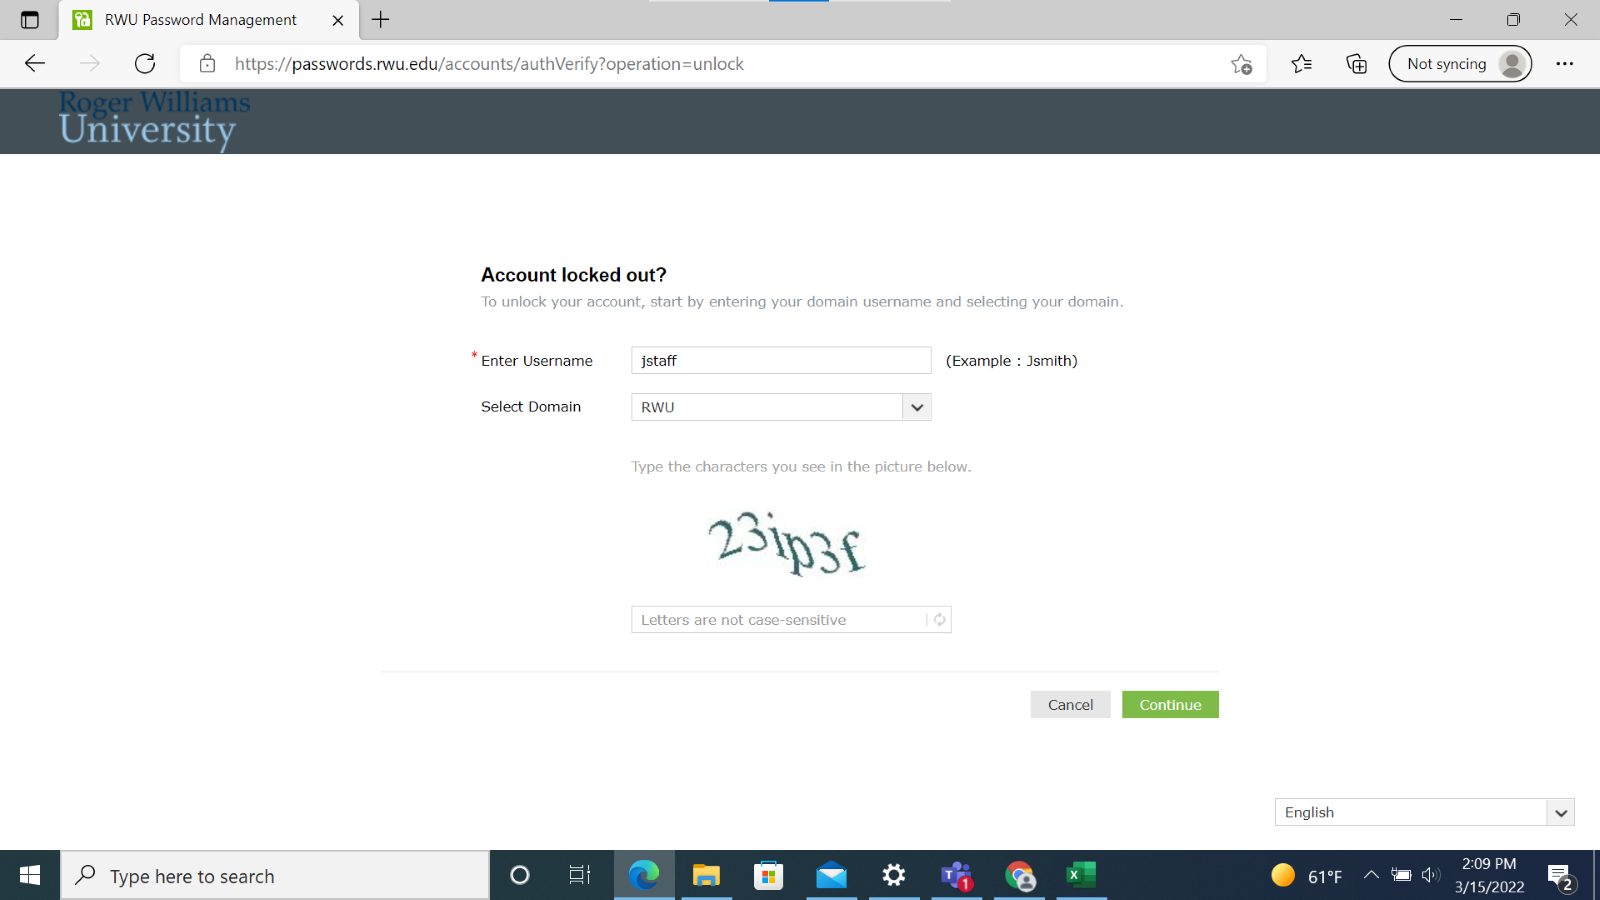 Account locked out? page with field requirements for username, domain and captcha. Green Continue button on bottom right.